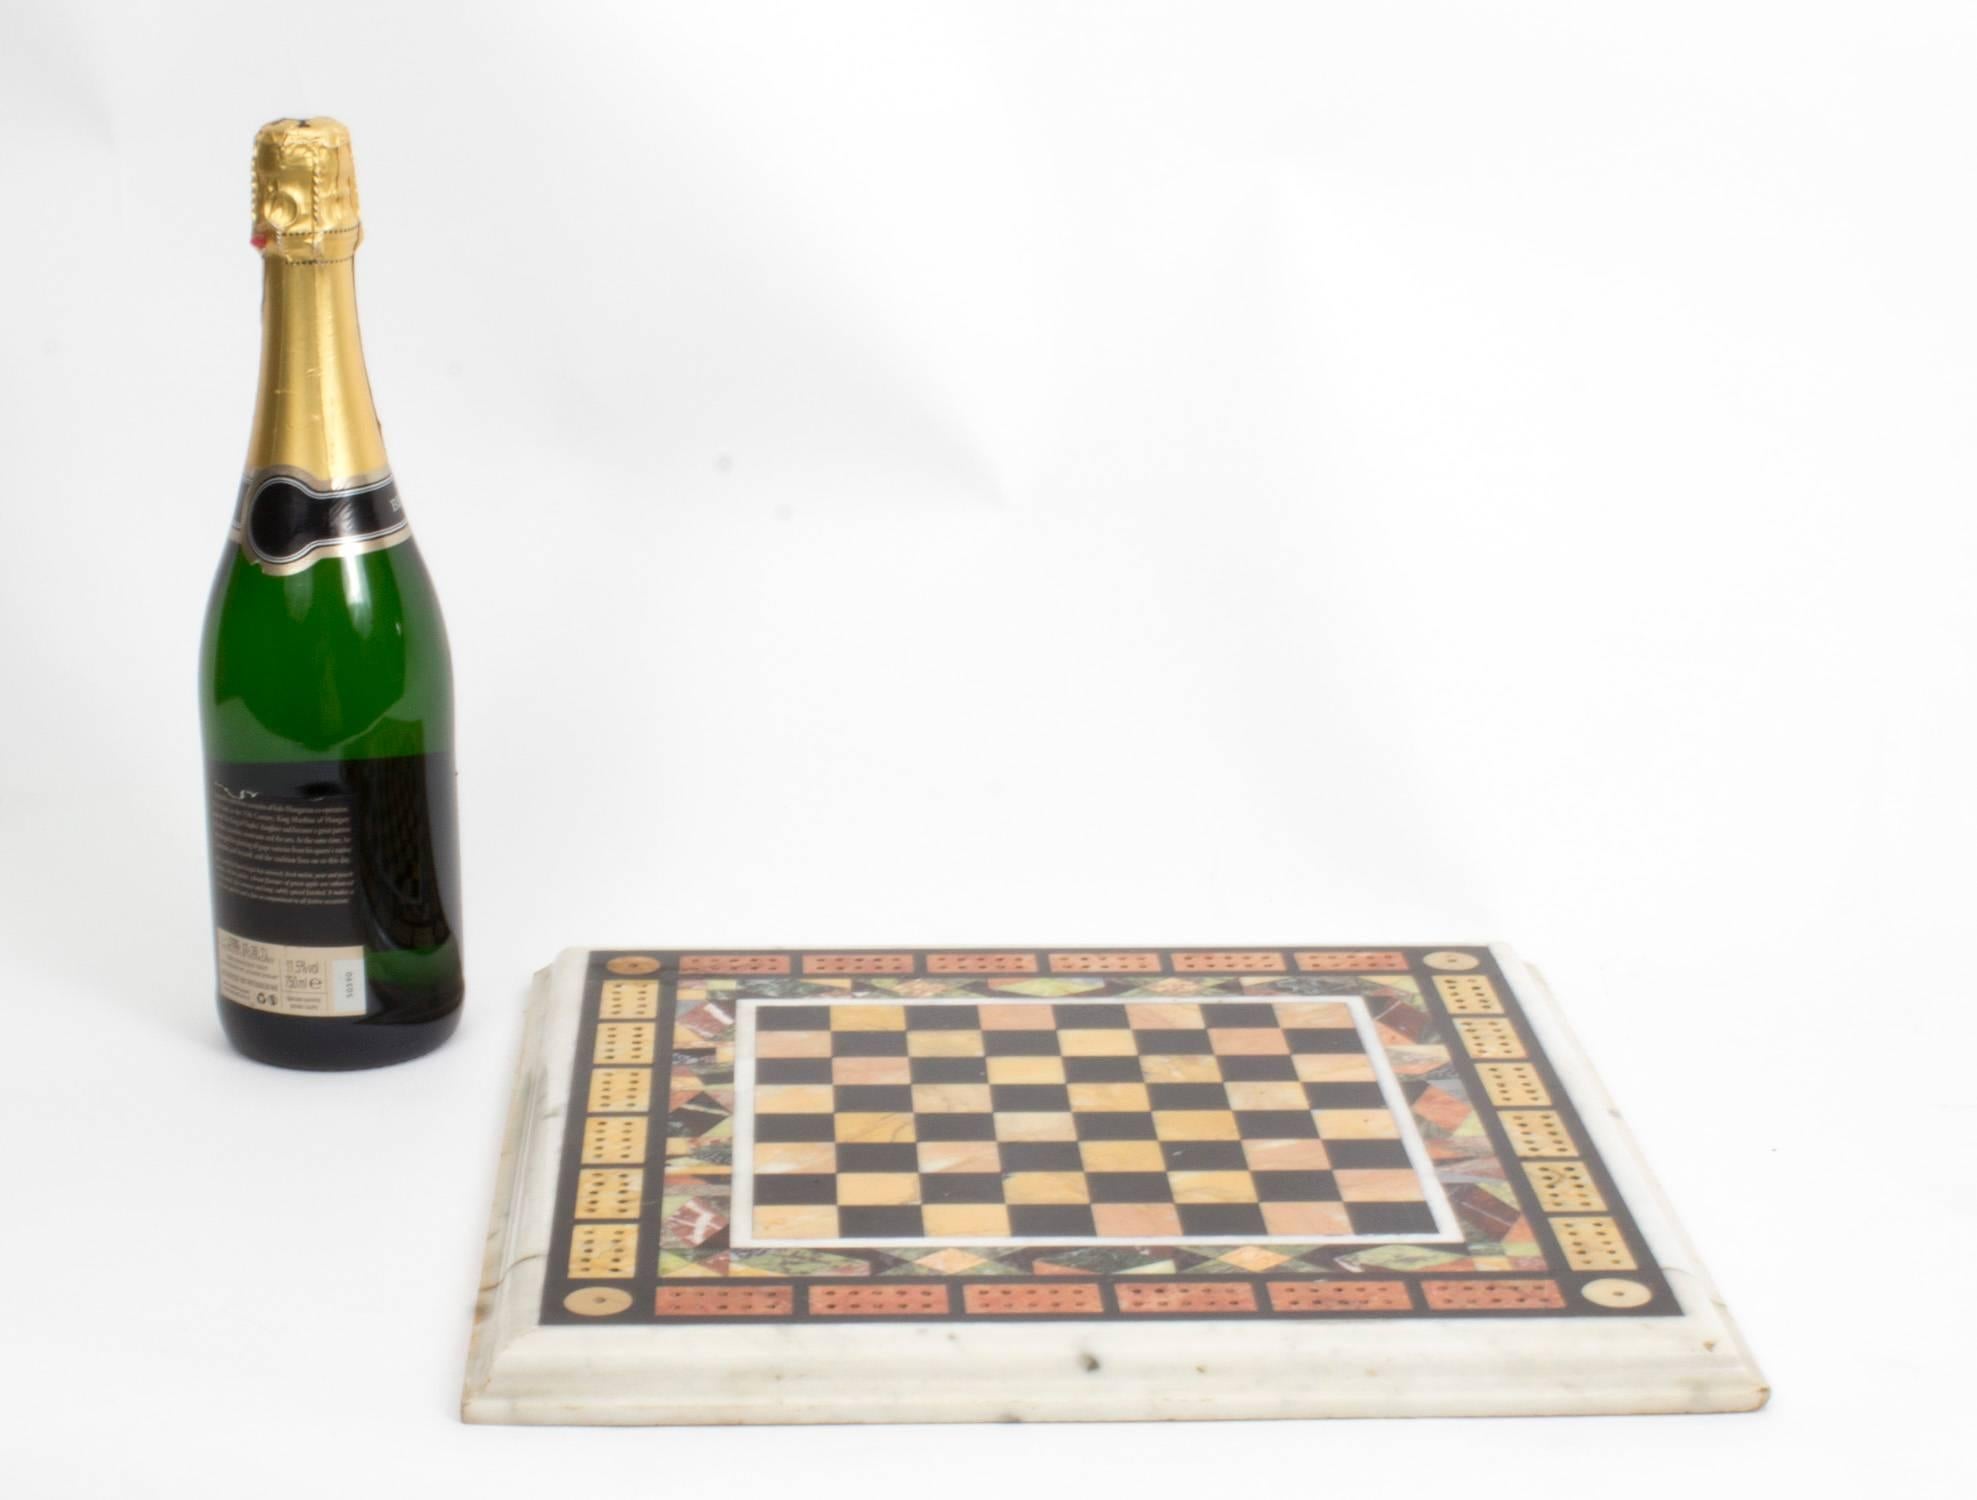 19th Century Antique Chess and Cribbage Specimen Marble Tabletop, circa 1880